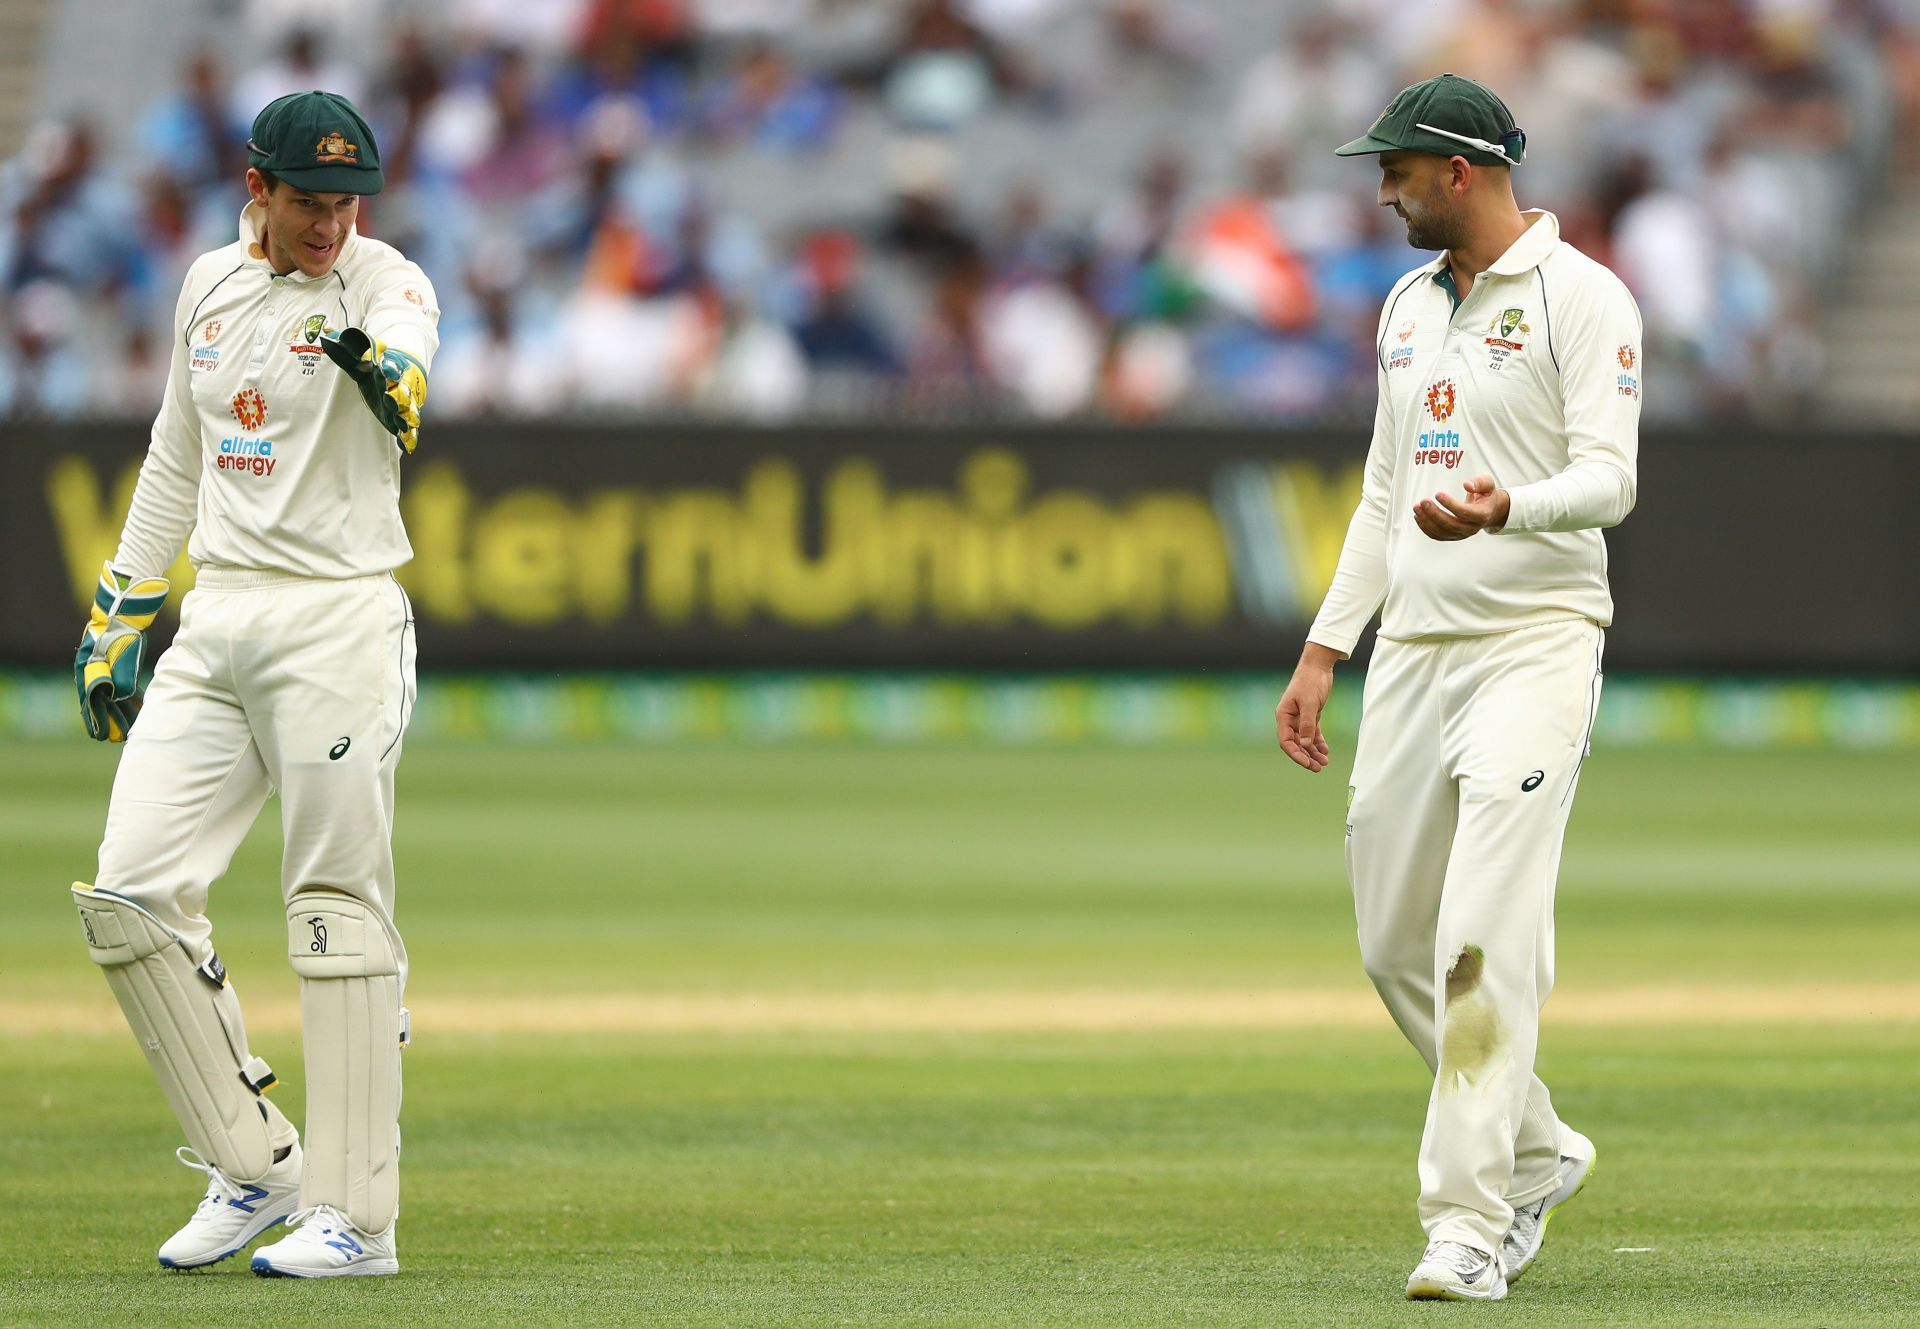 Tim Paine (L) and Nathan Lyon. (Image source: Getty)